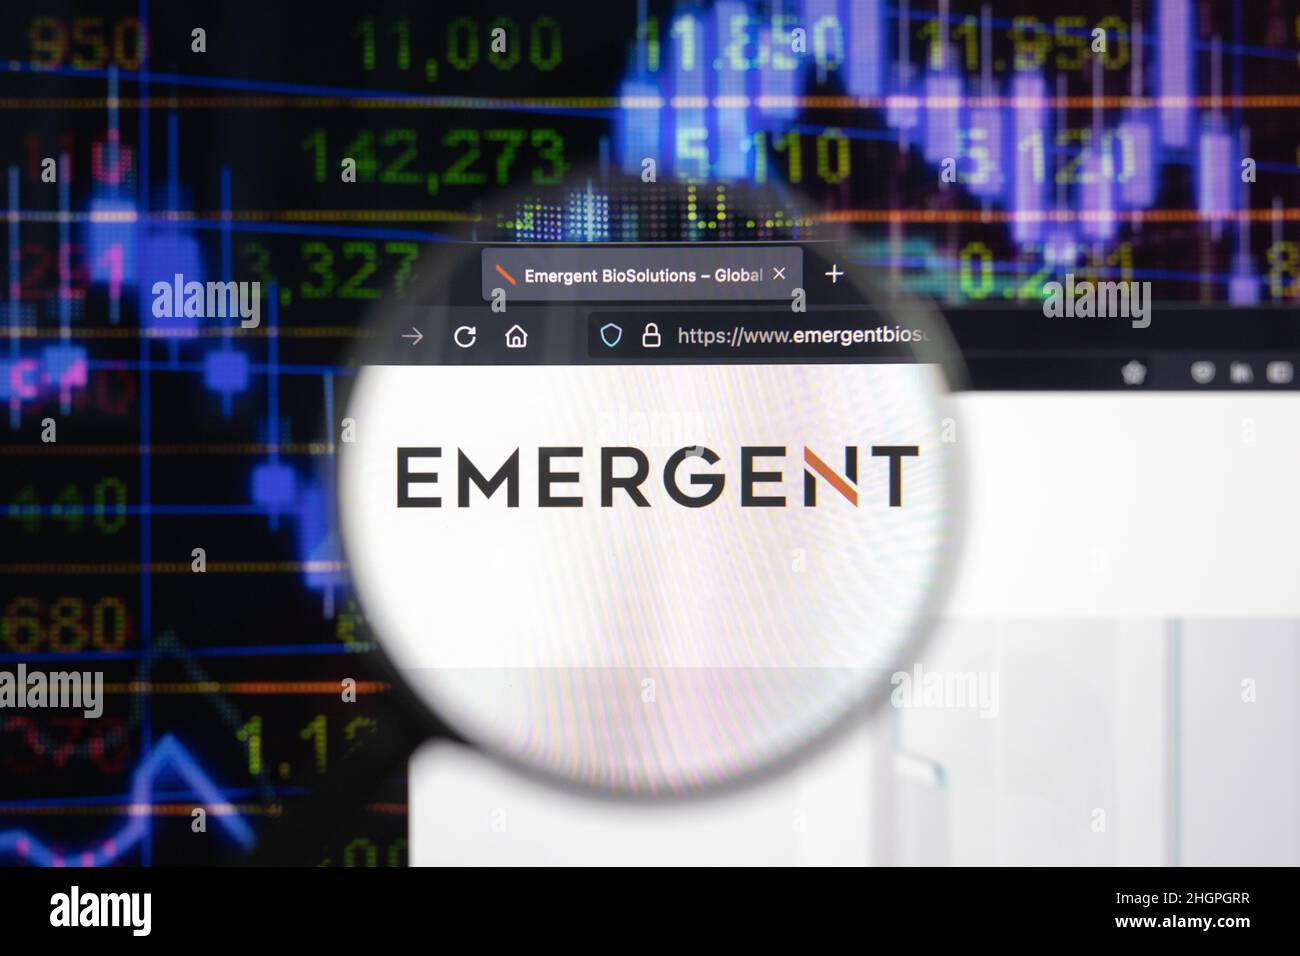 Emergent company logo on a website with blurry stock market developments in the background, seen on a computer screen through a magnifying glass. Stock Photo